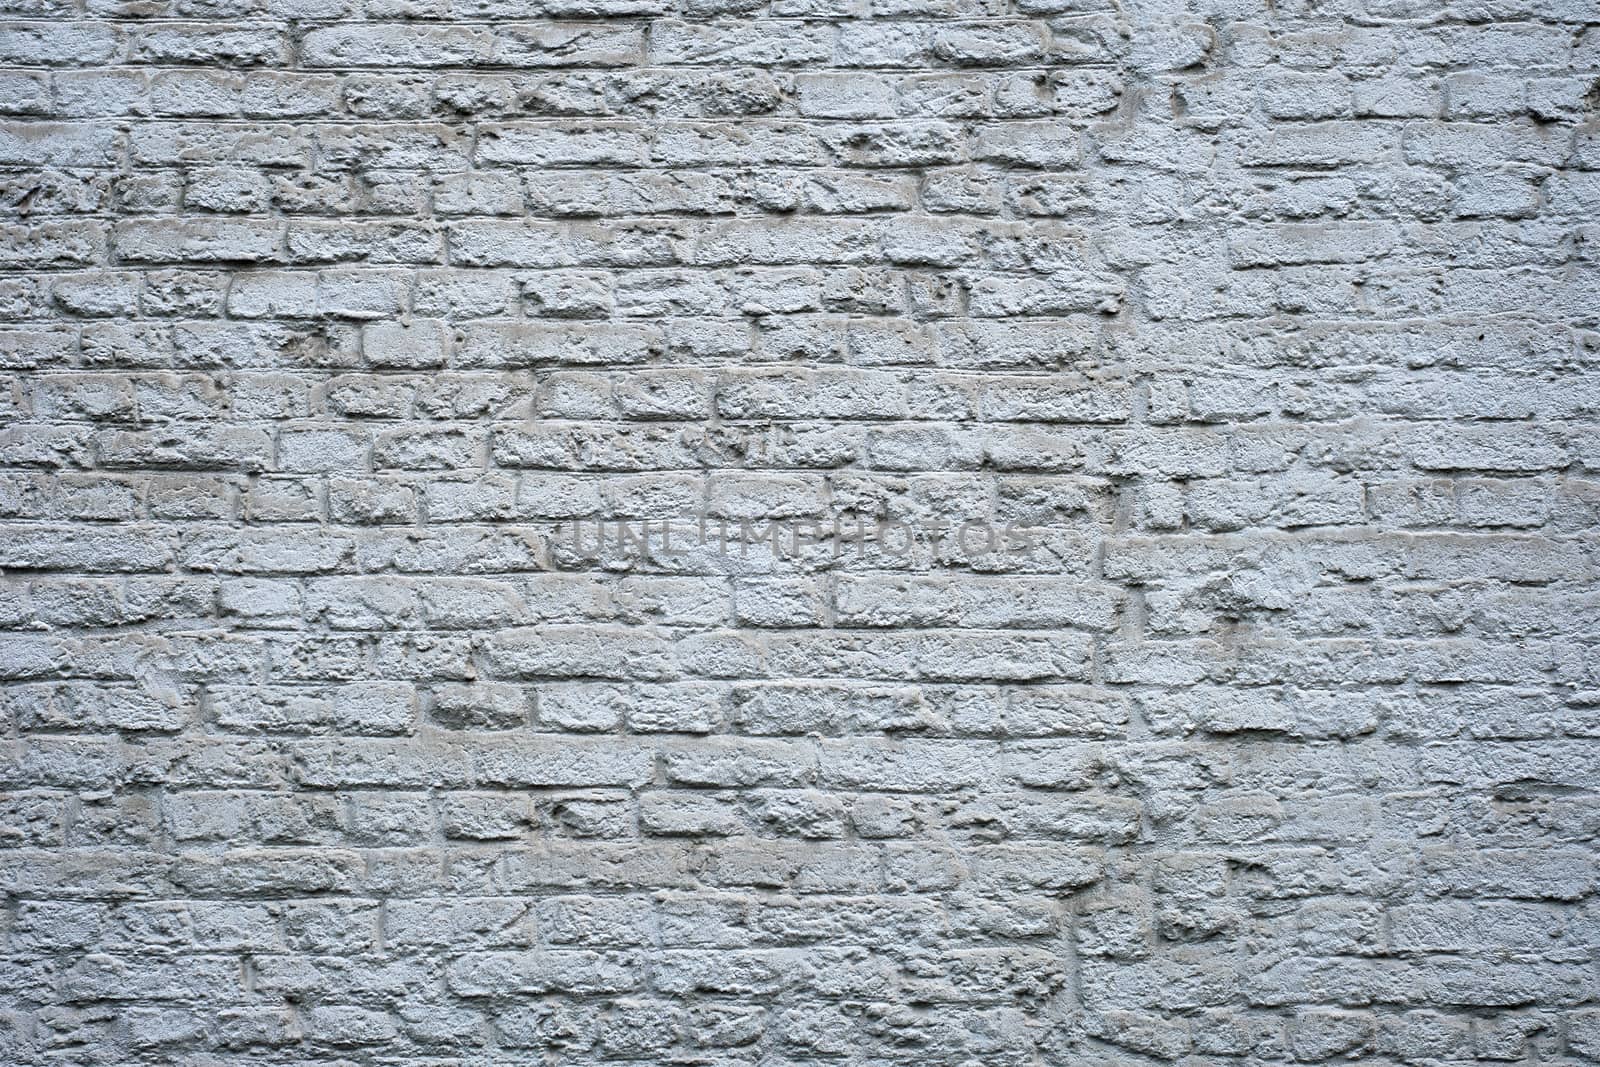 Brick wall texture background by dimol